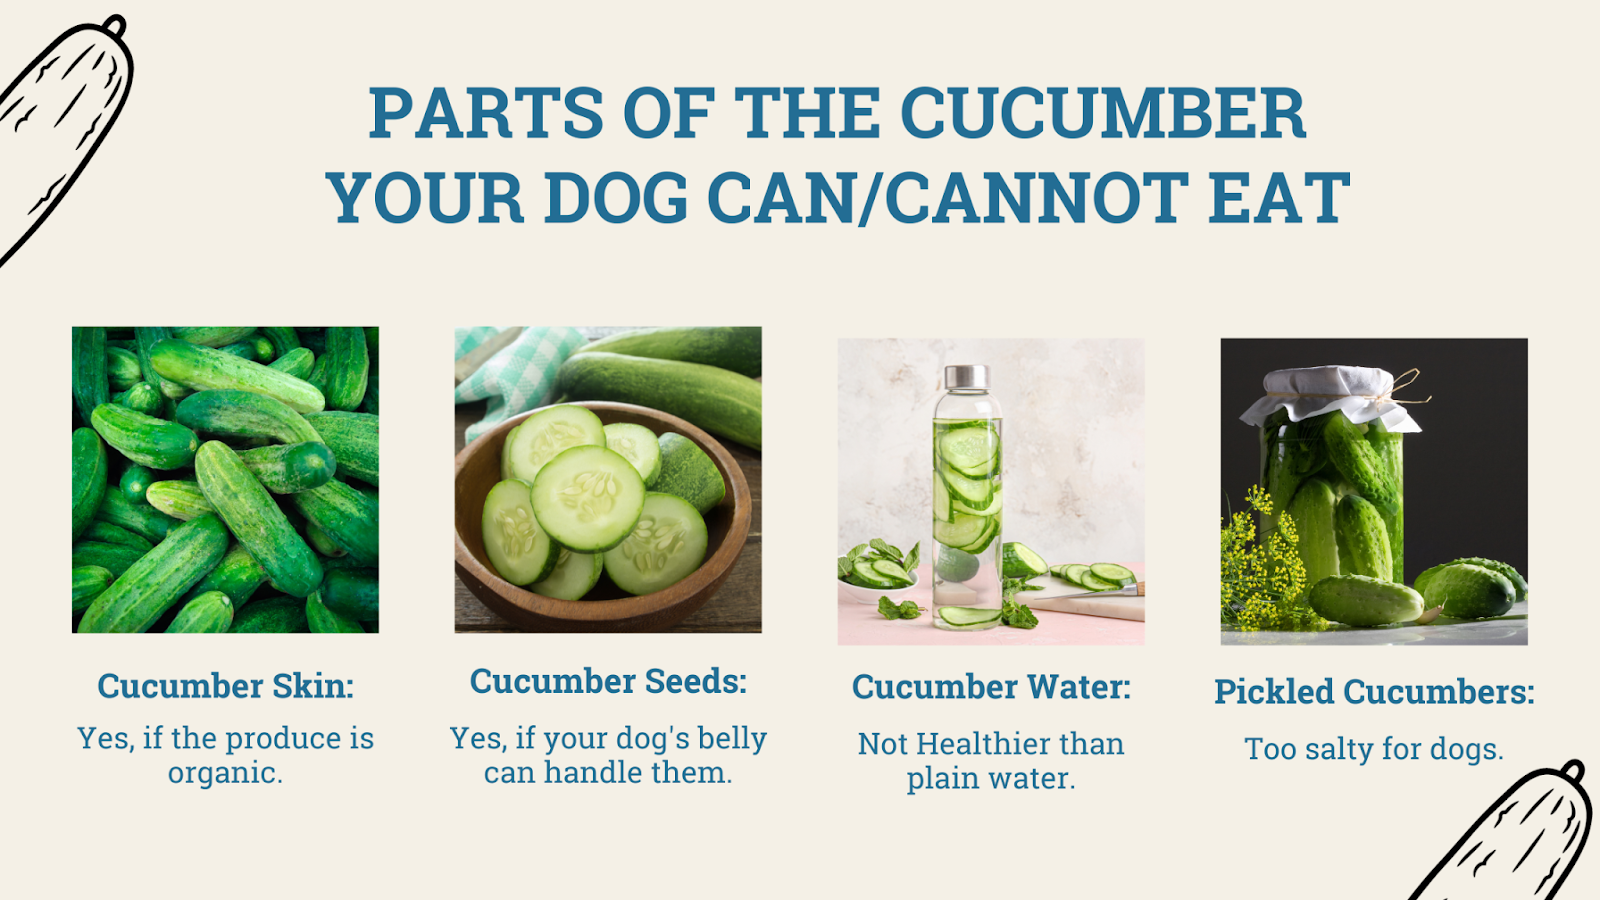 Parts of the cucumber dogs can and cannot eat